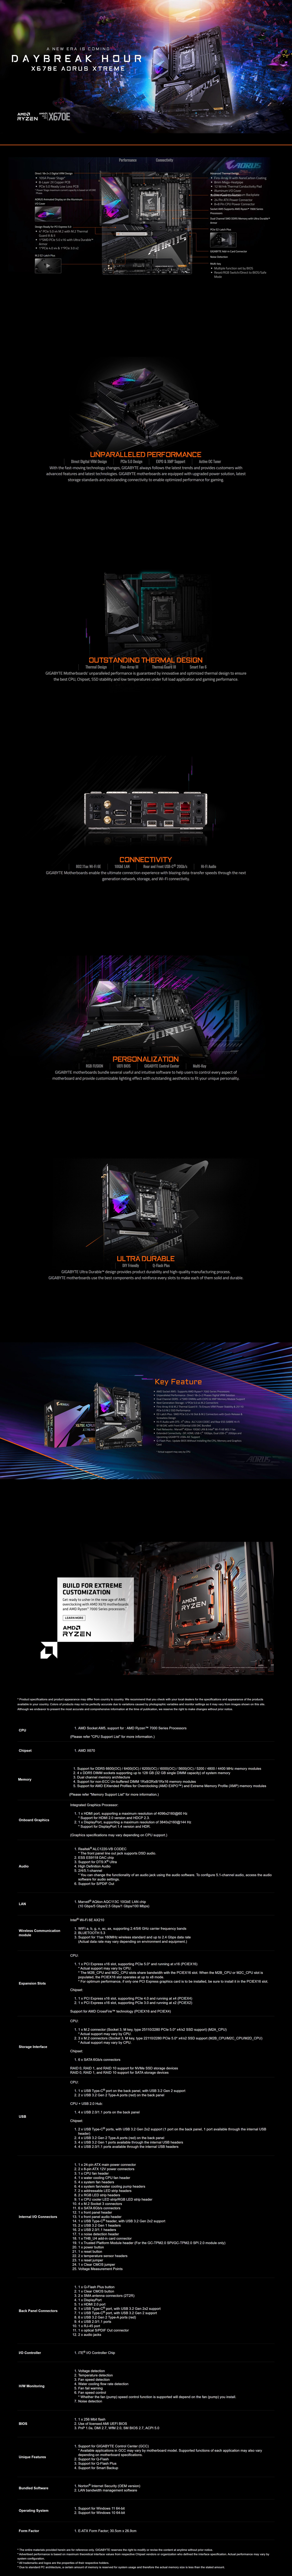 A large marketing image providing additional information about the product Gigabyte X670E Aorus Xtreme AM5 eATX Desktop Motherboard - Additional alt info not provided